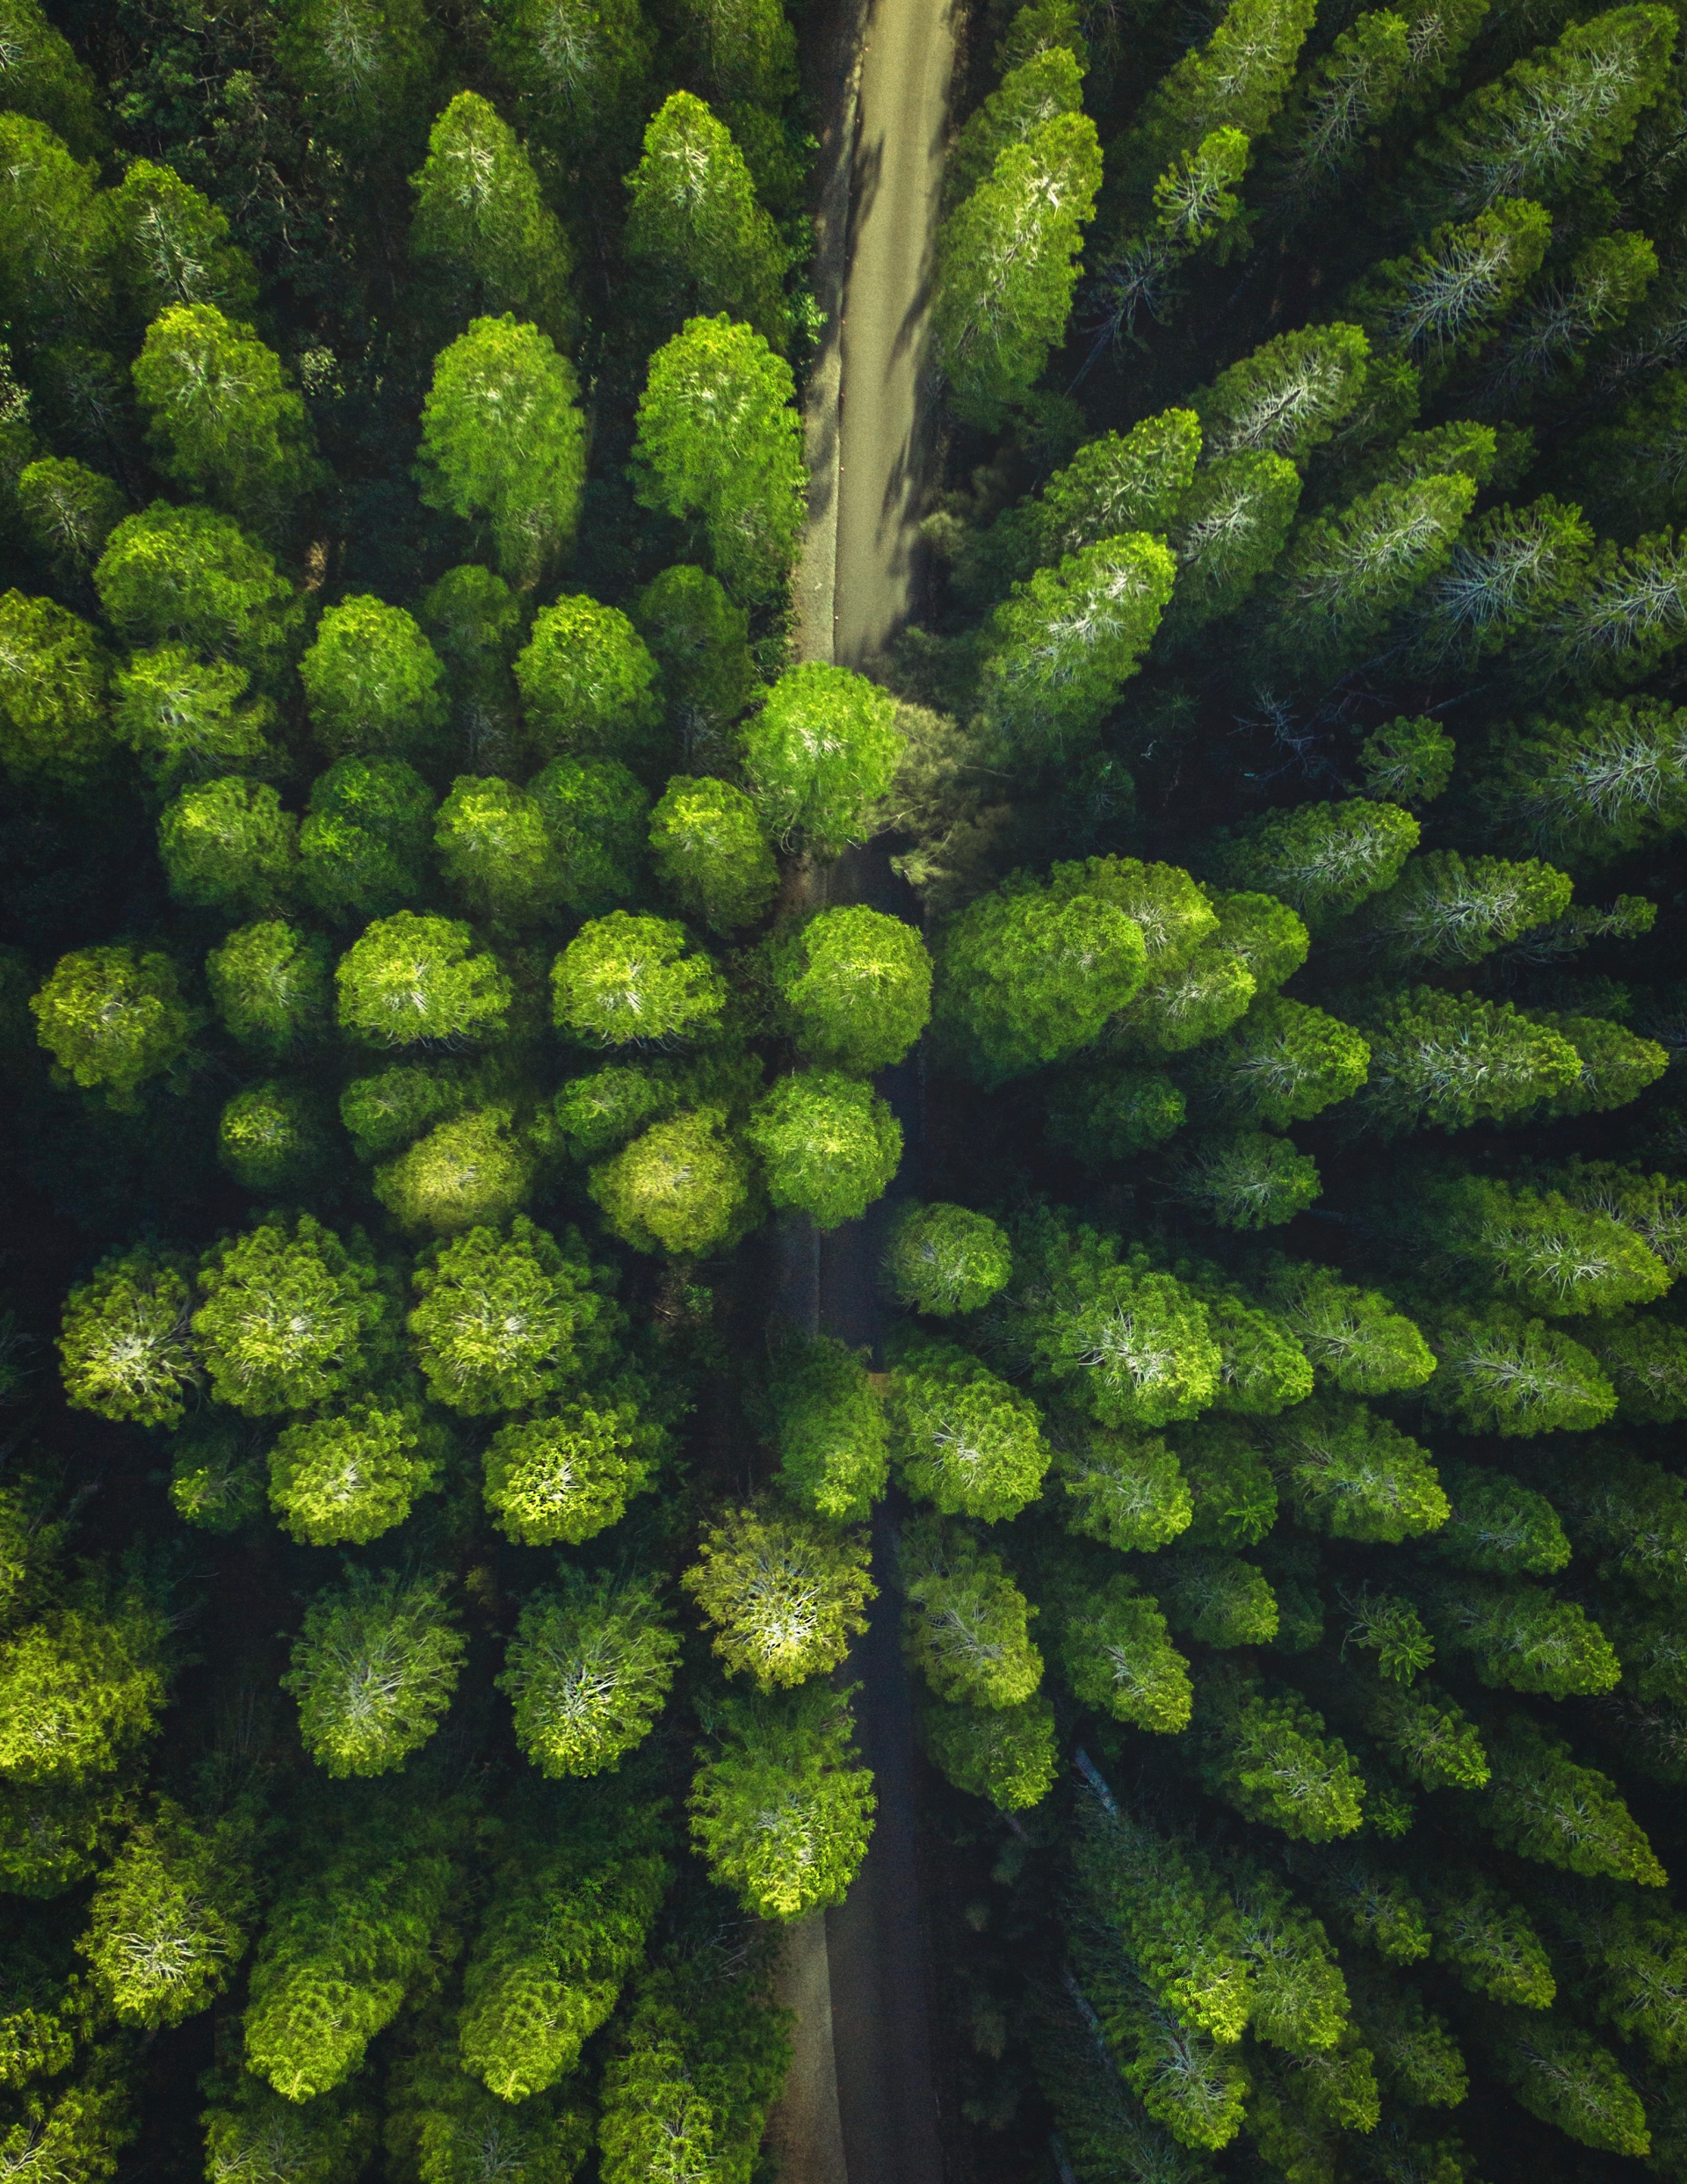 Photo by Phoenix Drone Pros, Robert Biggs, An aerial view of a forest with trees and a road.